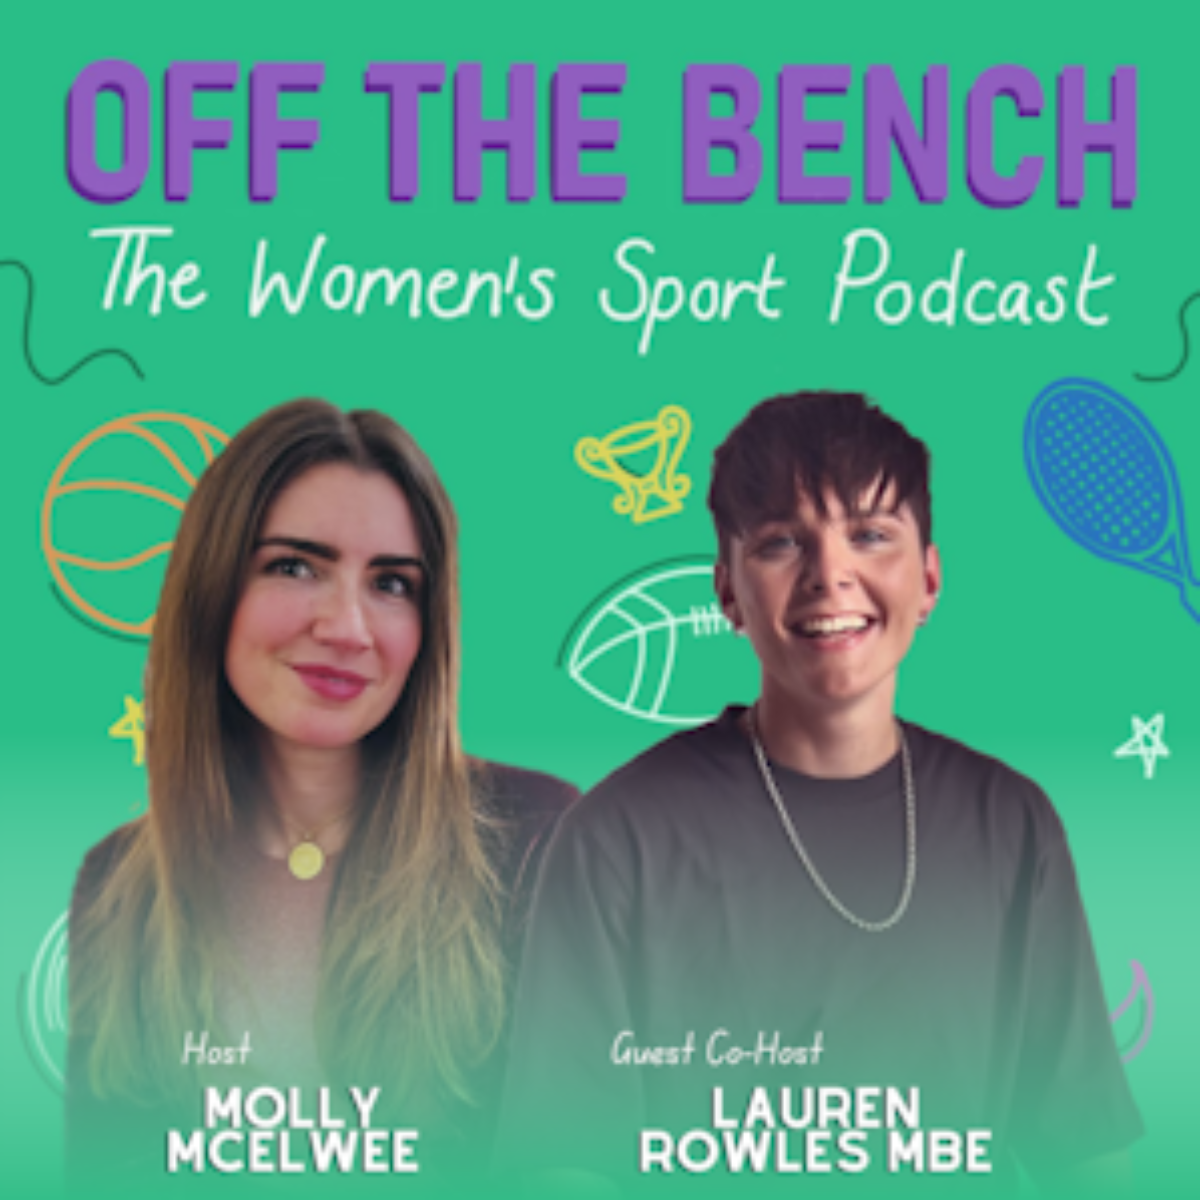 Off the Bench. The Women's Sport podcast.